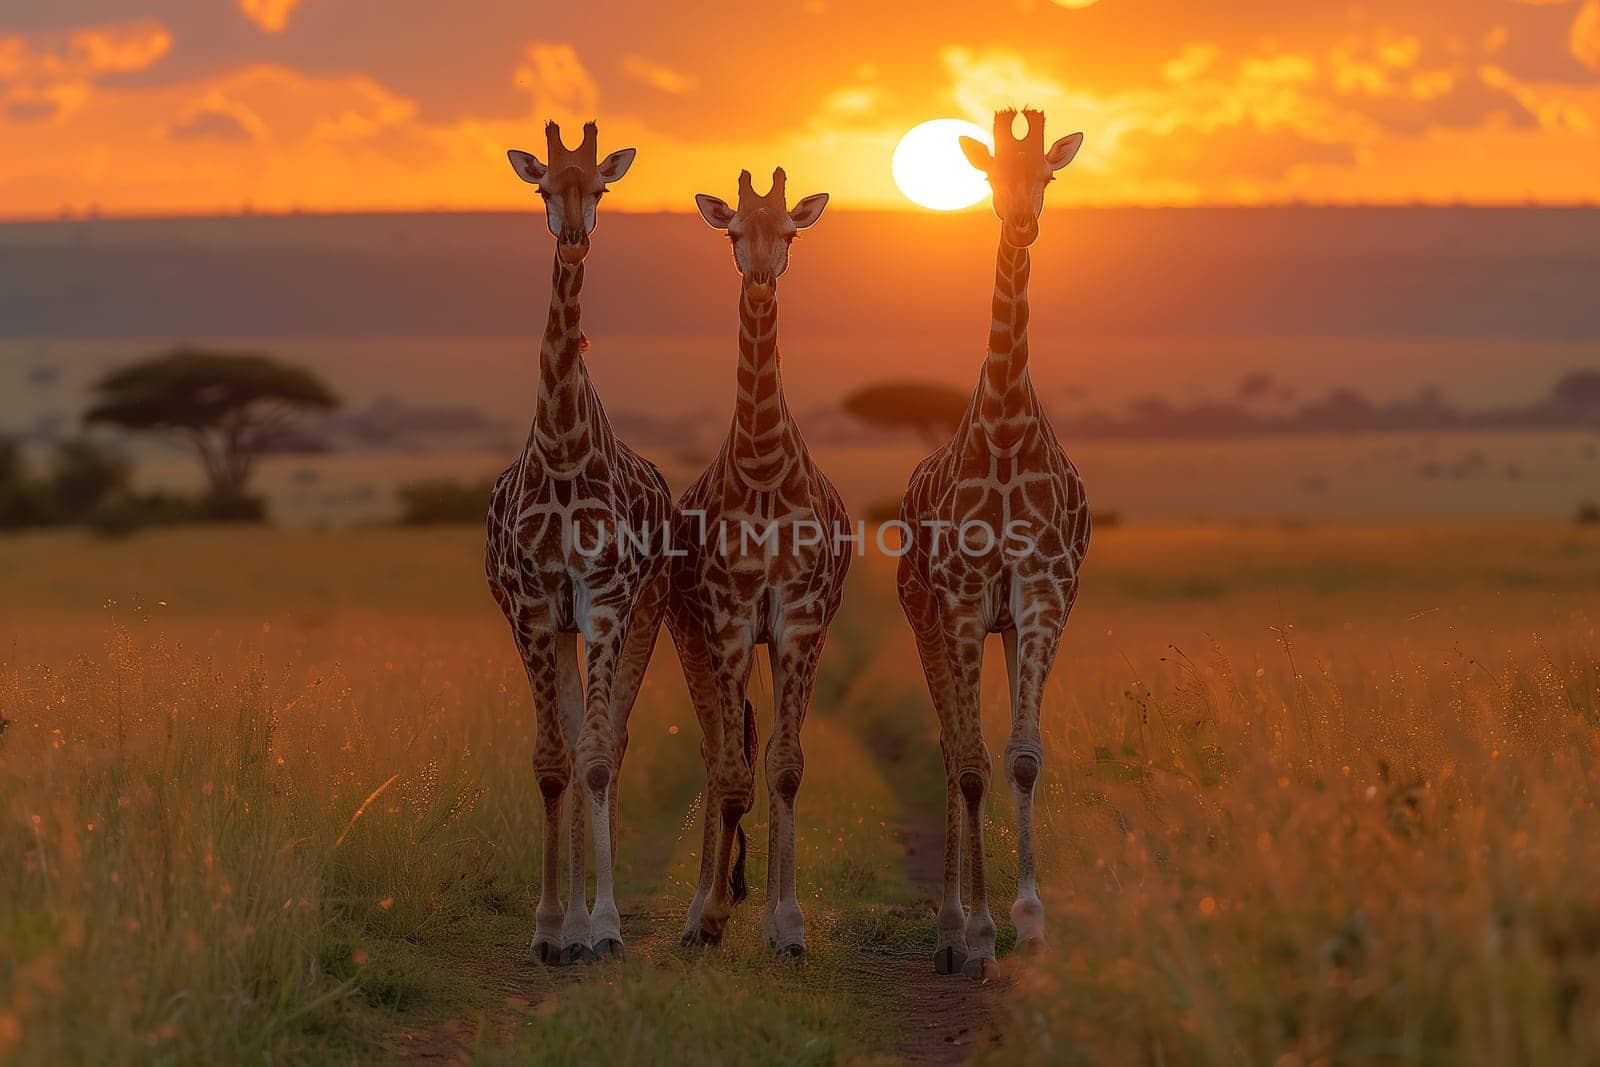 Three majestic Giraffes are gracefully standing in a field, silhouetted against the vibrant colors of the sunset sky, surrounded by a beautiful natural landscape